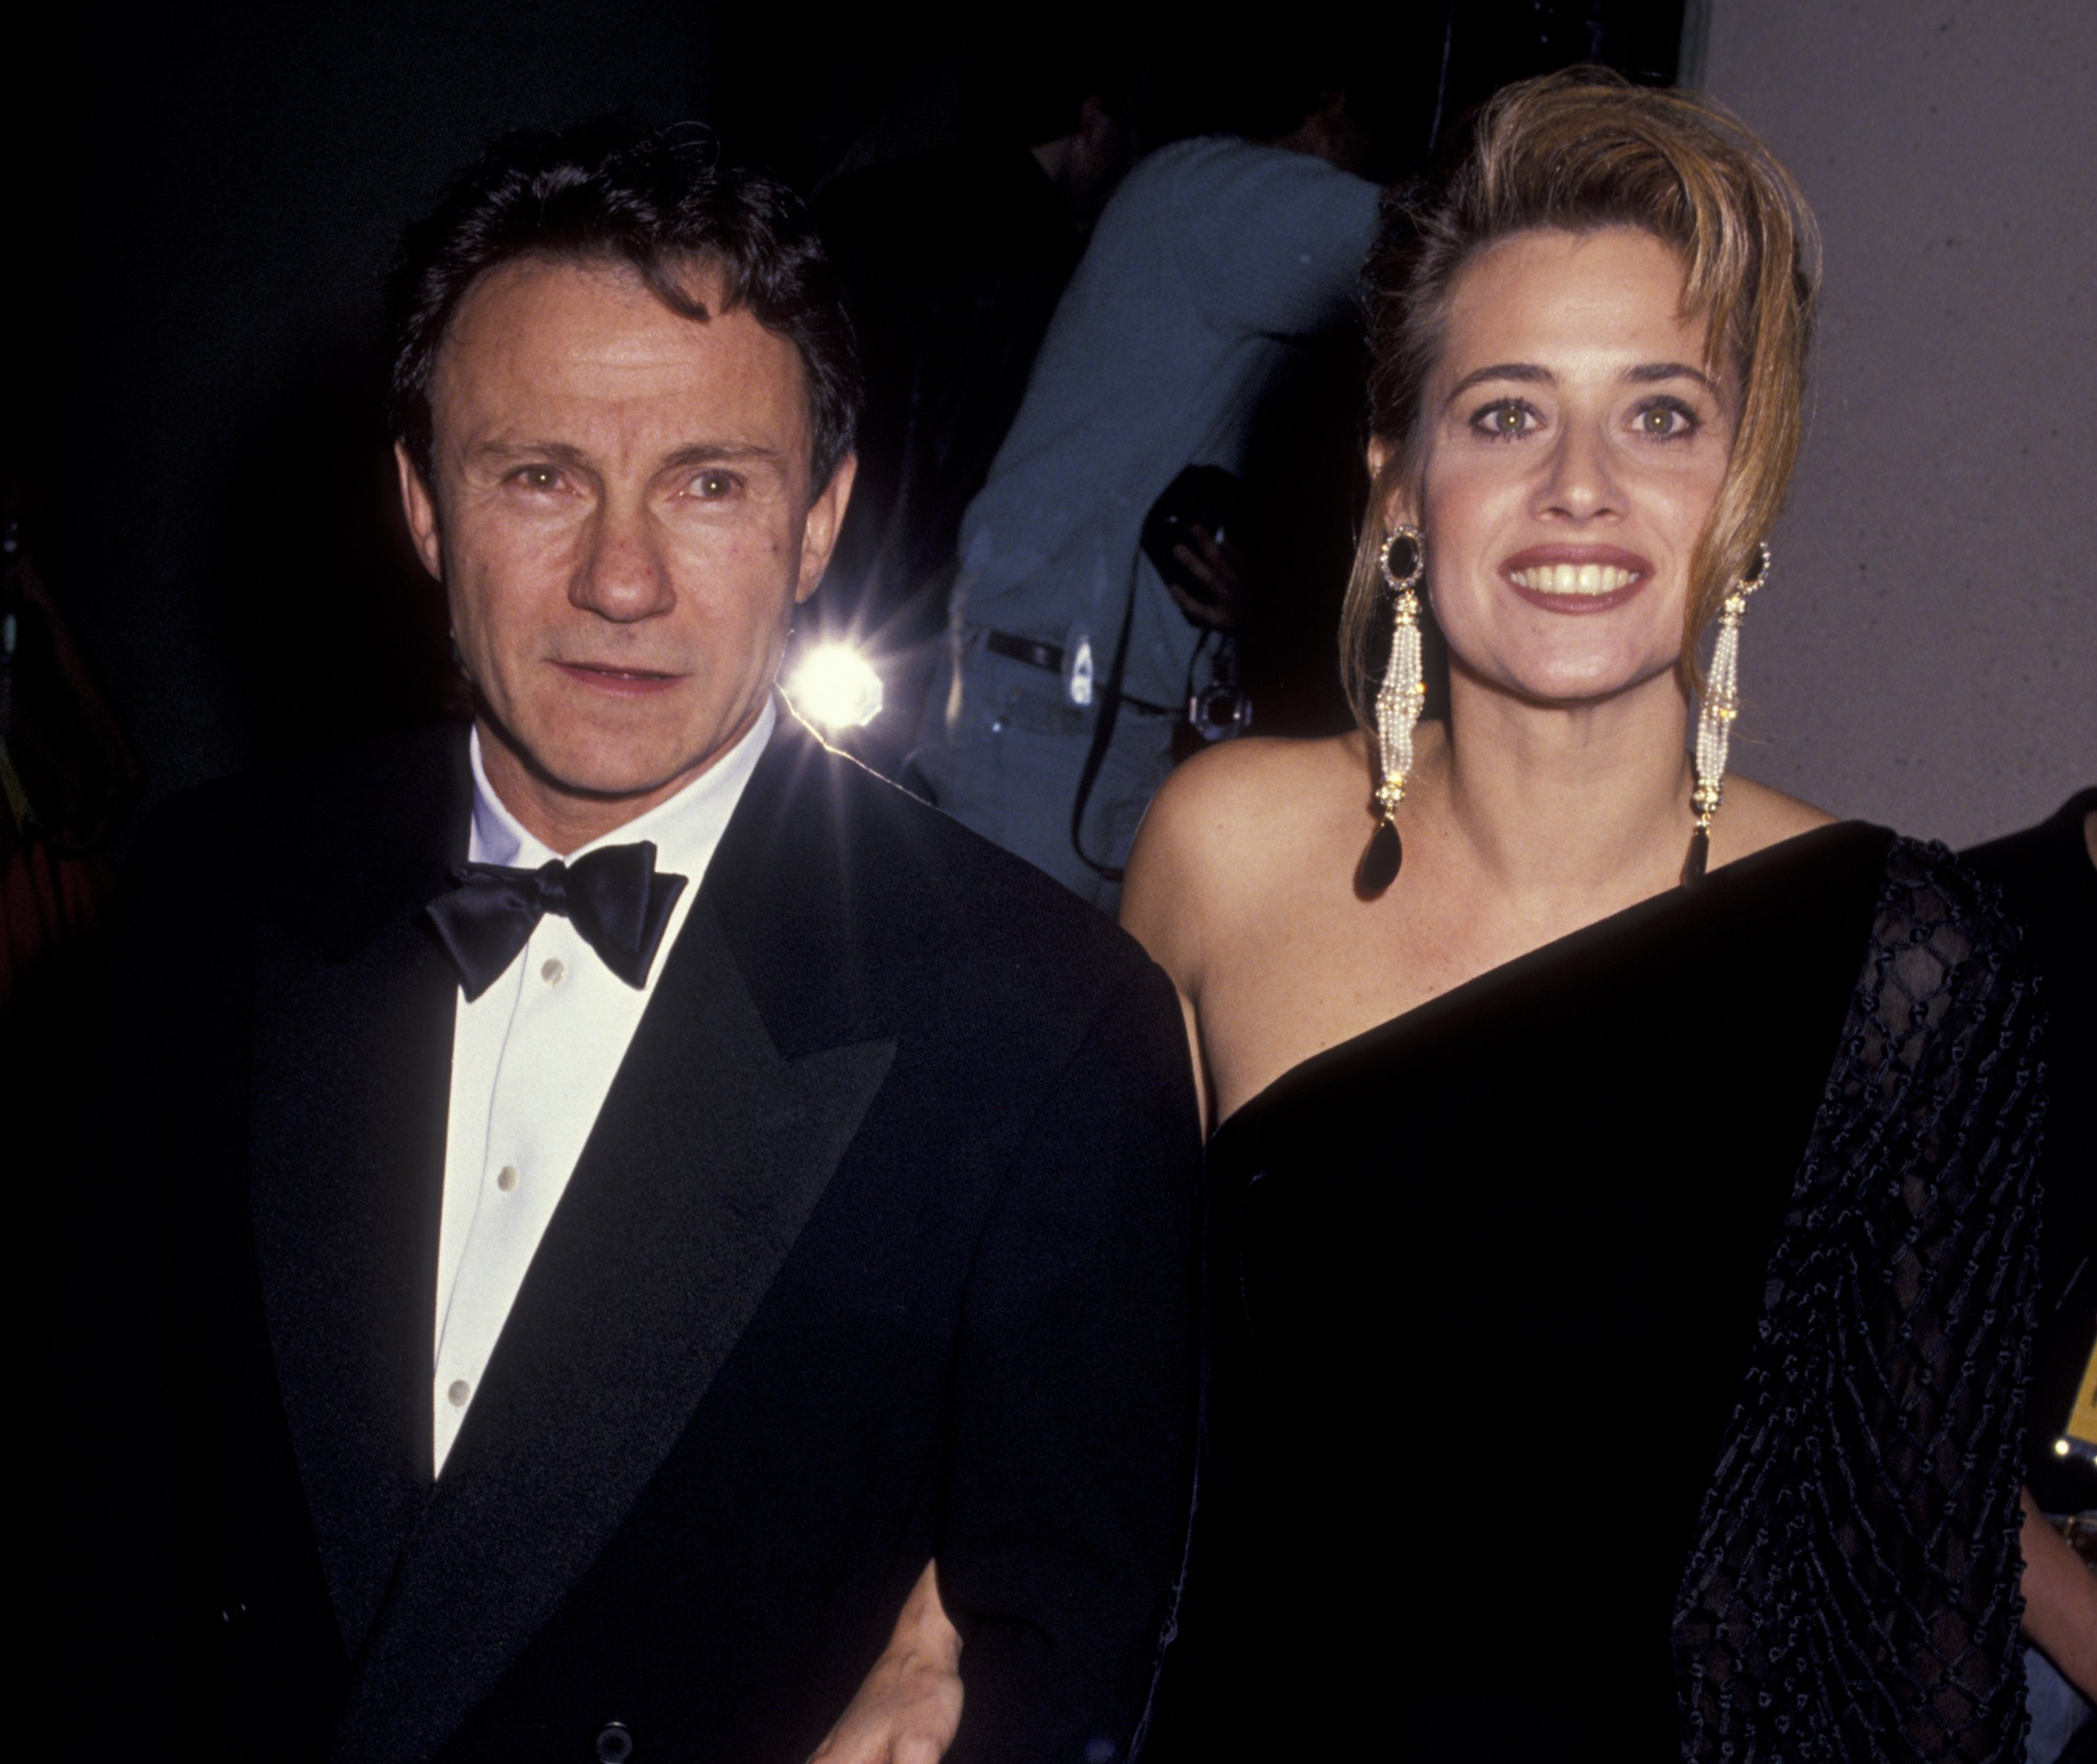 Harvey Keitel and Lorraine Bracco at 48th Annual Golden Globe Awards on January 19, 1991 at the Beverly Hilton Hotel in Beverly Hills, California. | Source: Getty Images